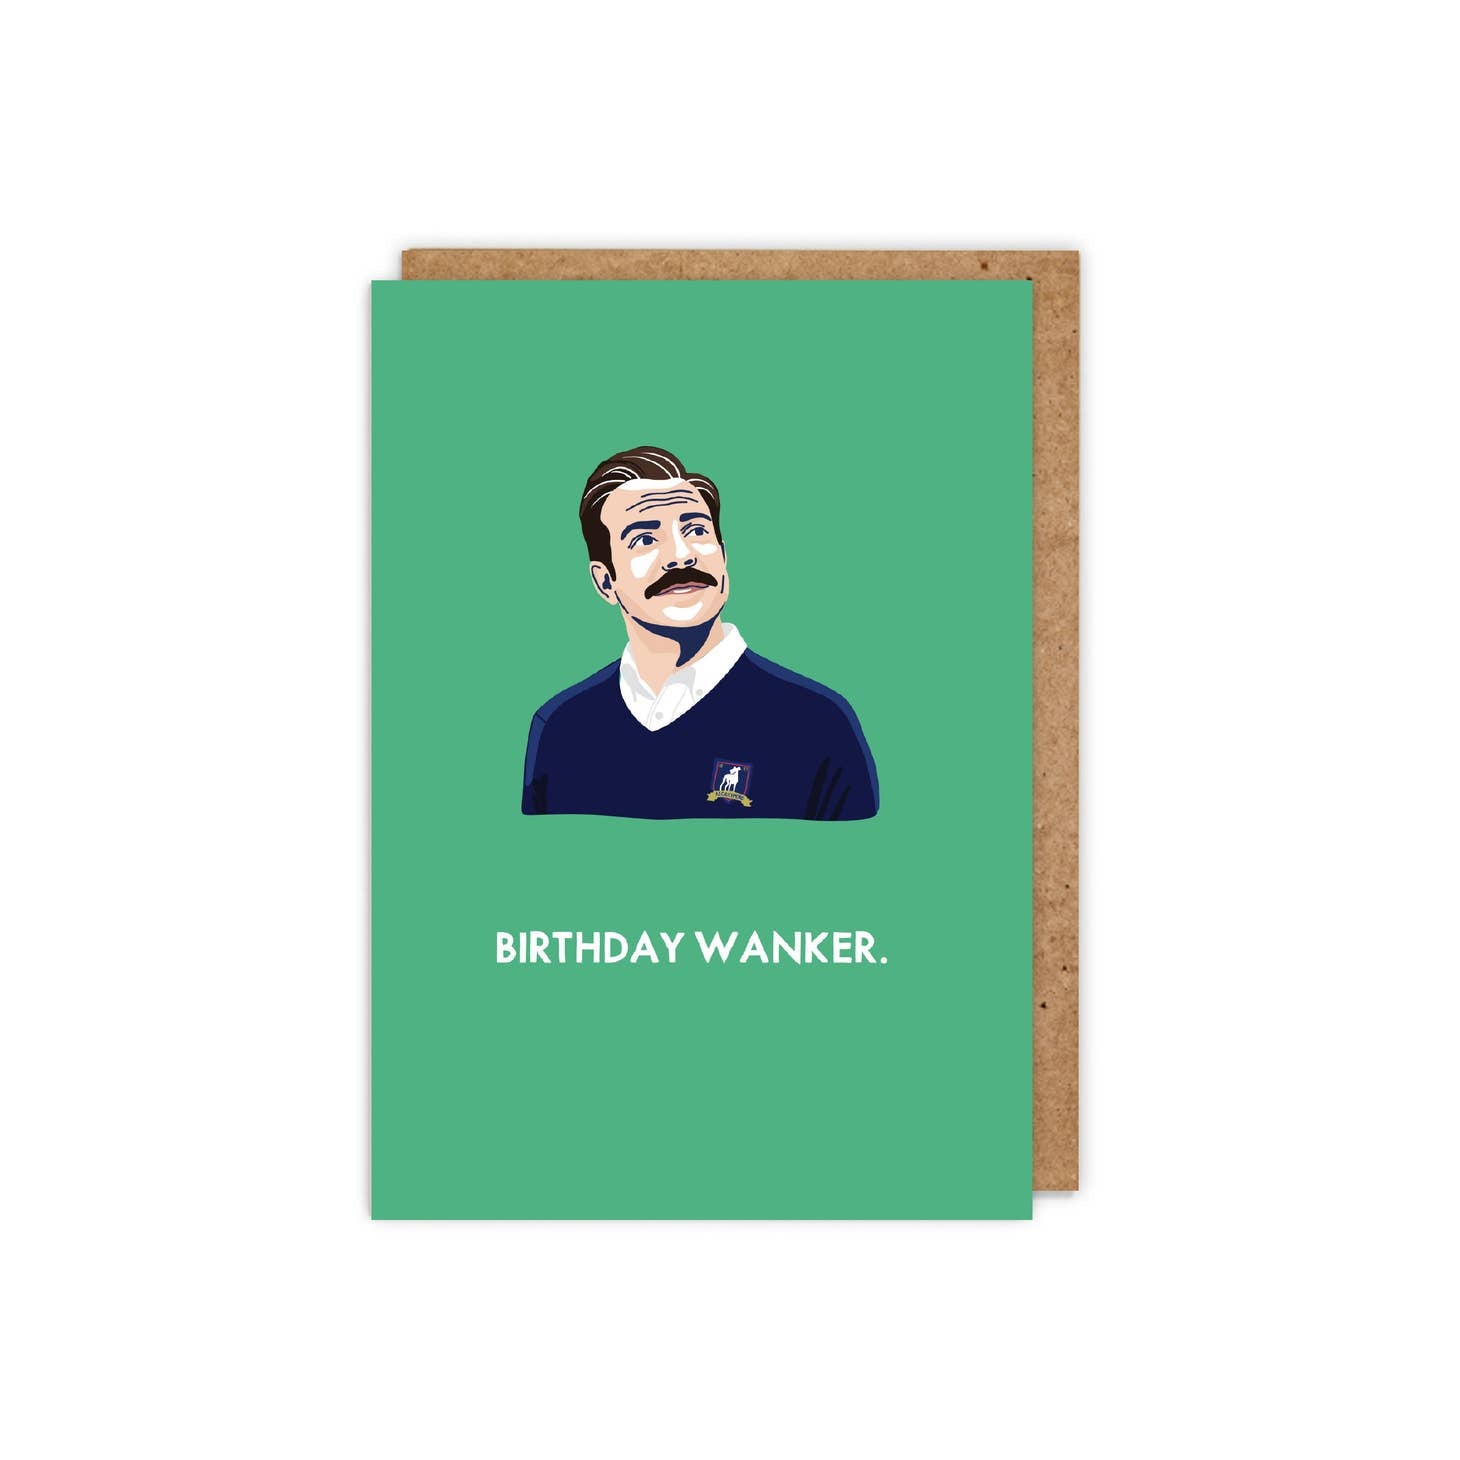 Ted Lasso Birthday Wanker Card